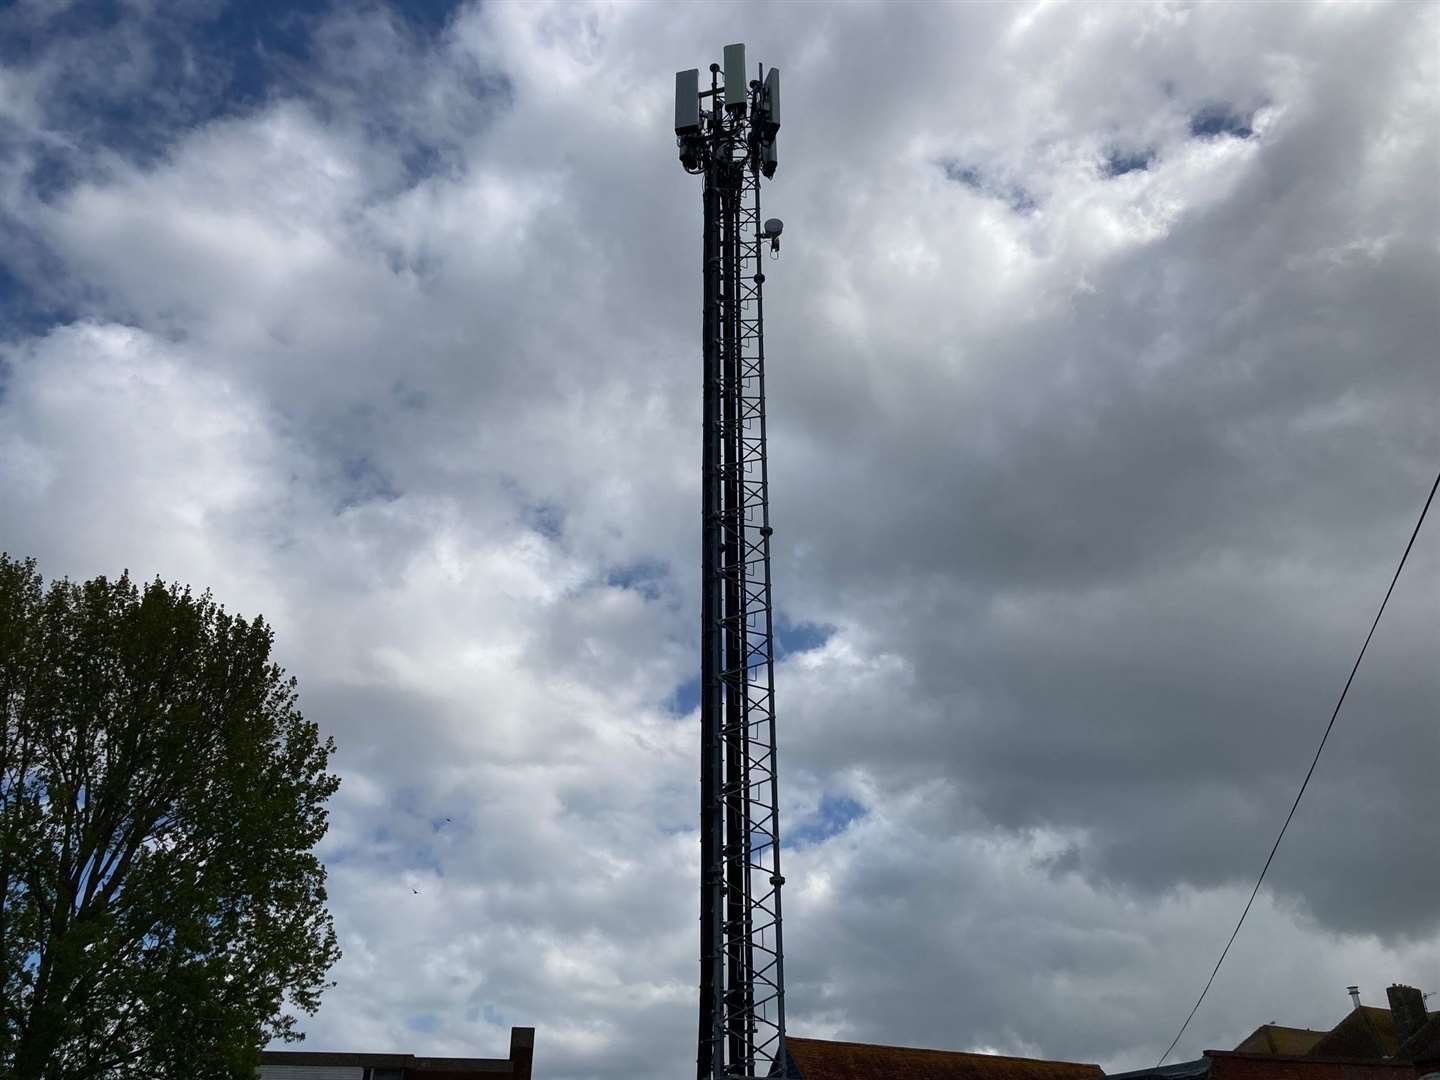 The 80ft EE phone mast in Central car park, Faversham